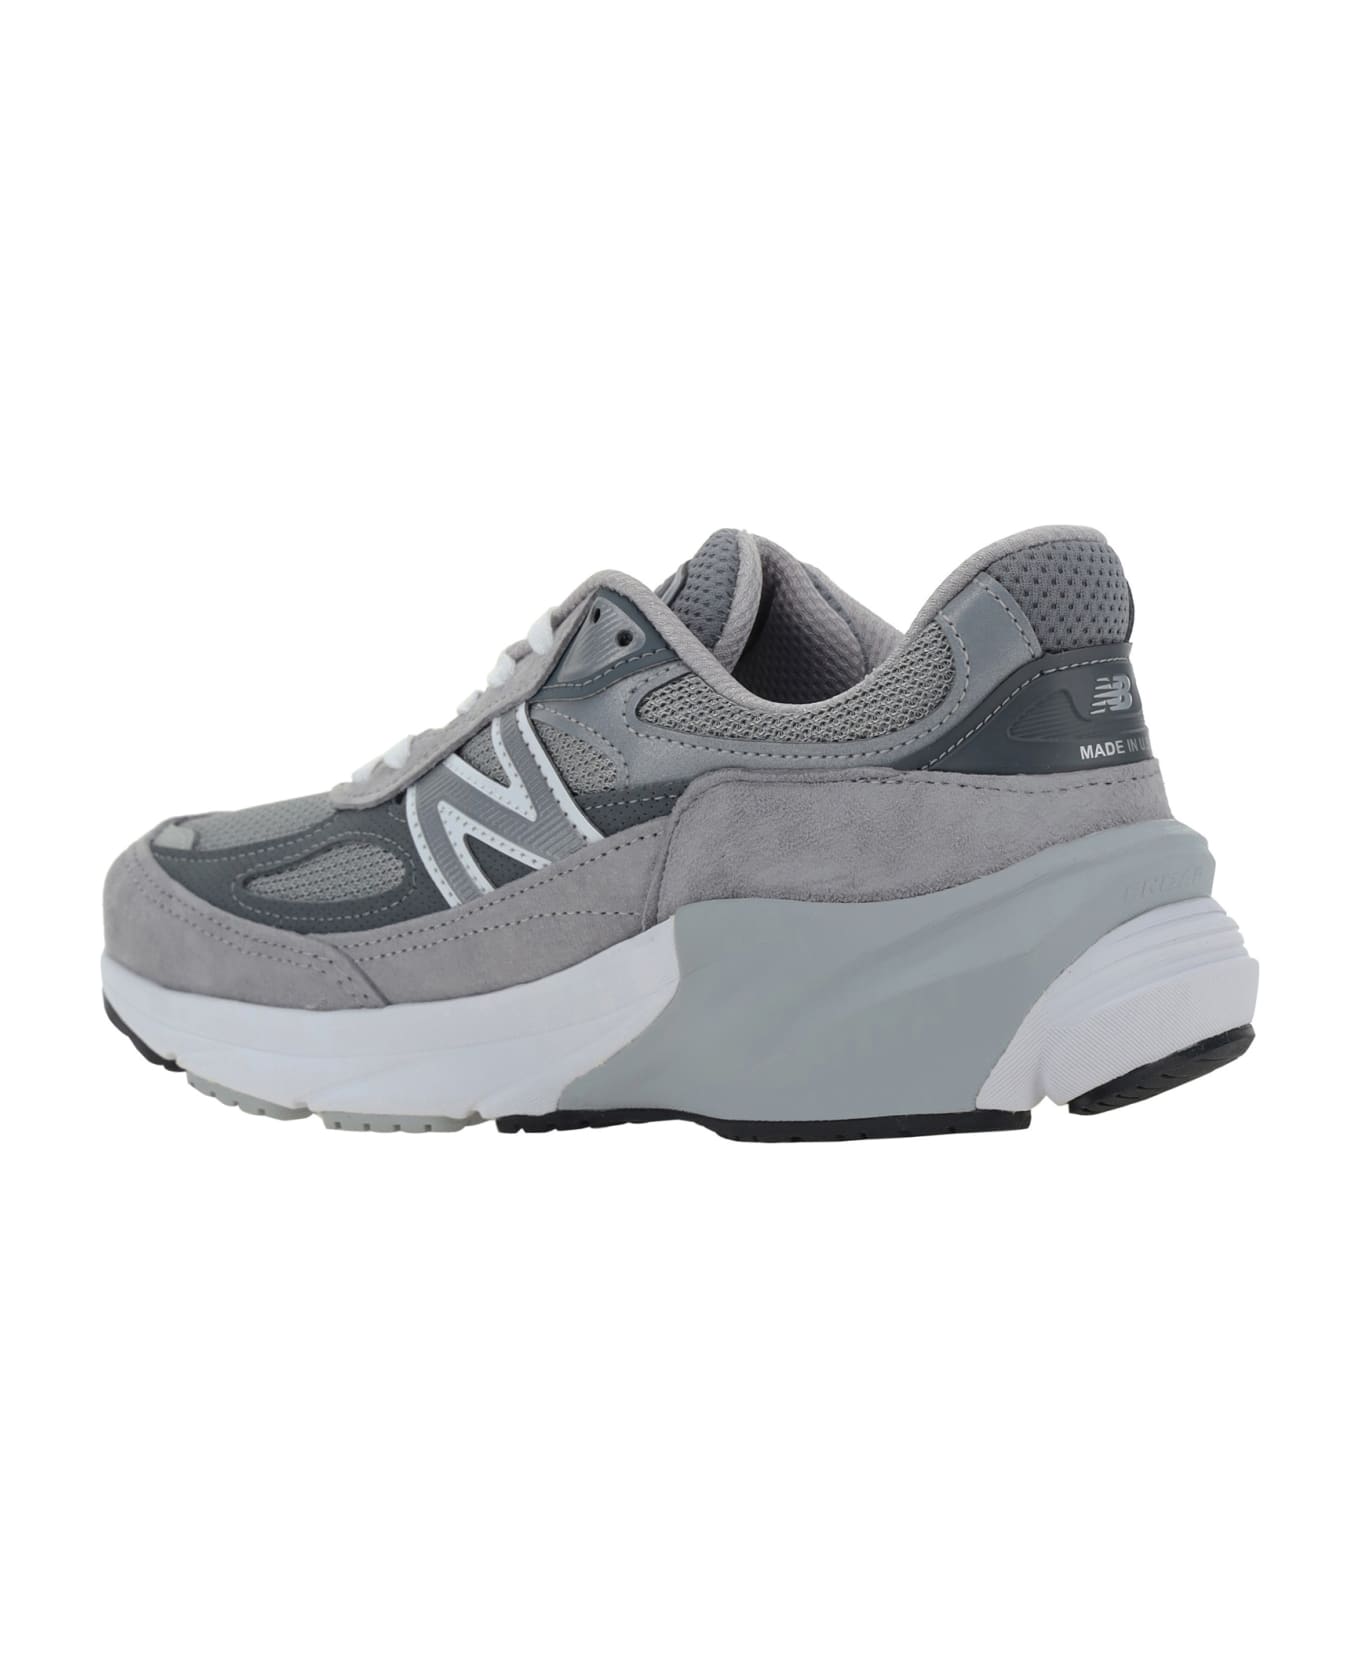 New Balance Lifestyle Sneakers - Cool Grey